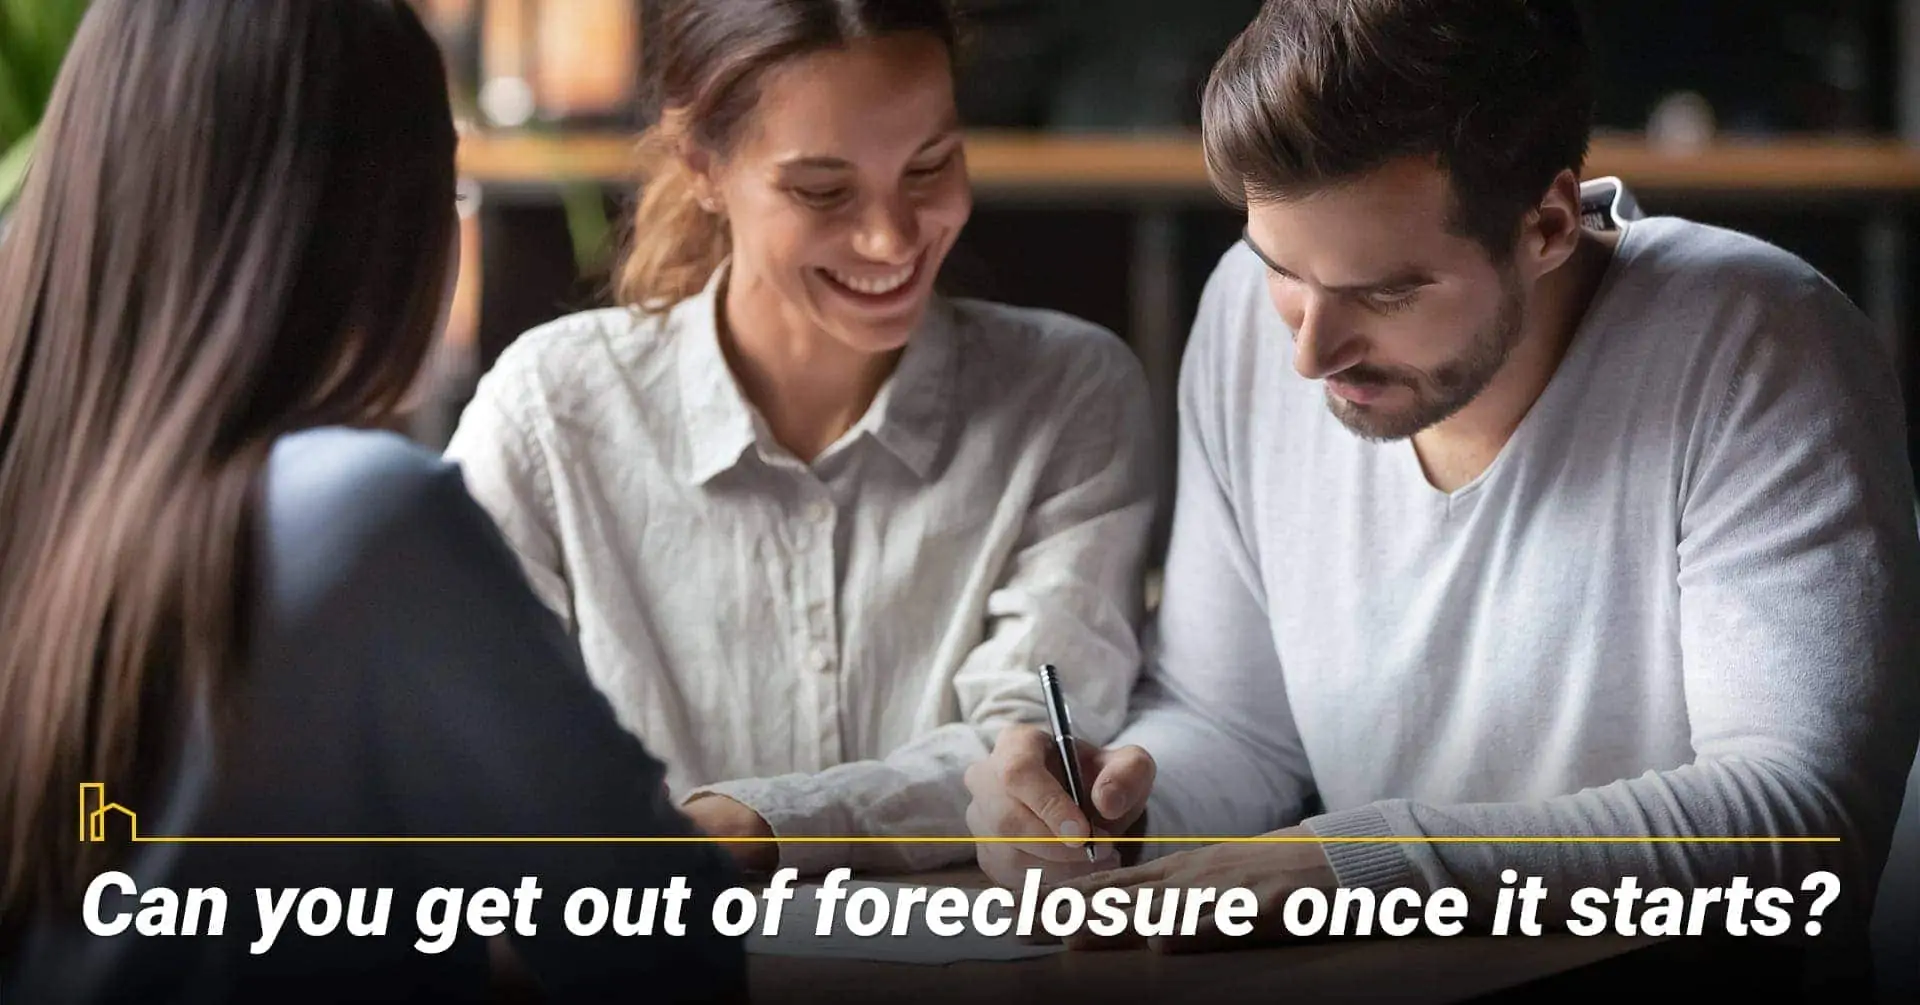 Can you get out of foreclosure once it starts? steps needed to take to stop the foreclosure process